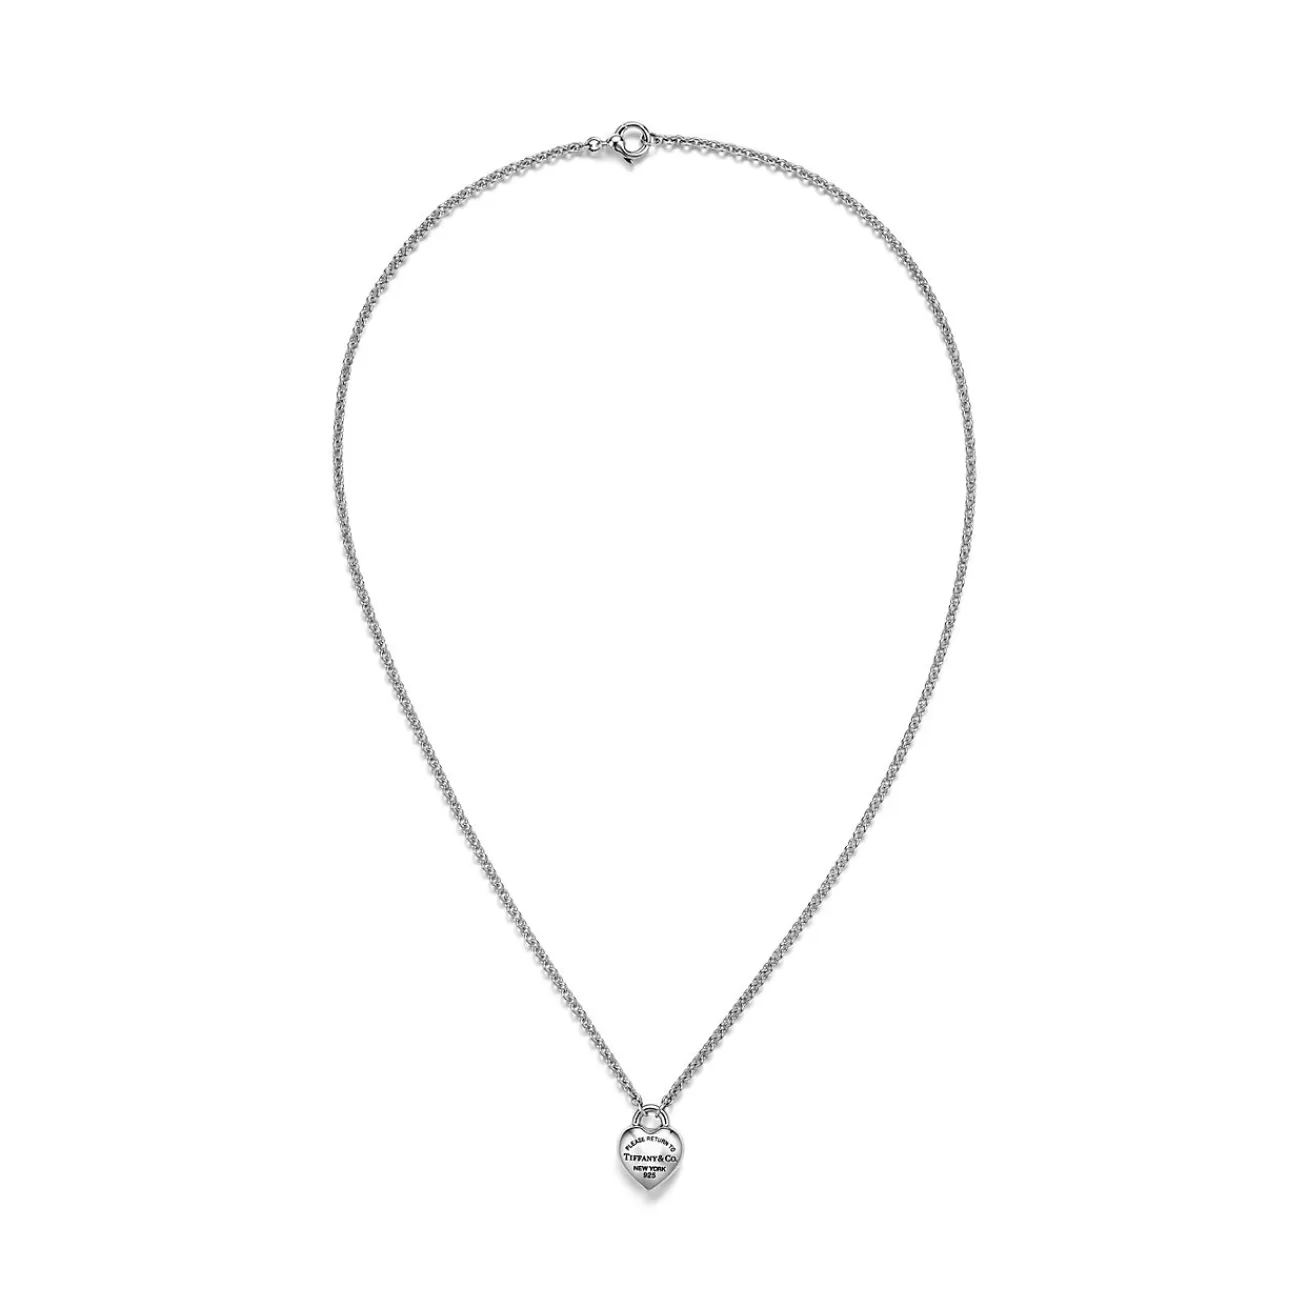 Tiffany & Co. Return to Tiffany® Full Heart Tag Pendant and Earrings Set in Sterling Silver | ^ Necklaces & Pendants | Gifts for Her